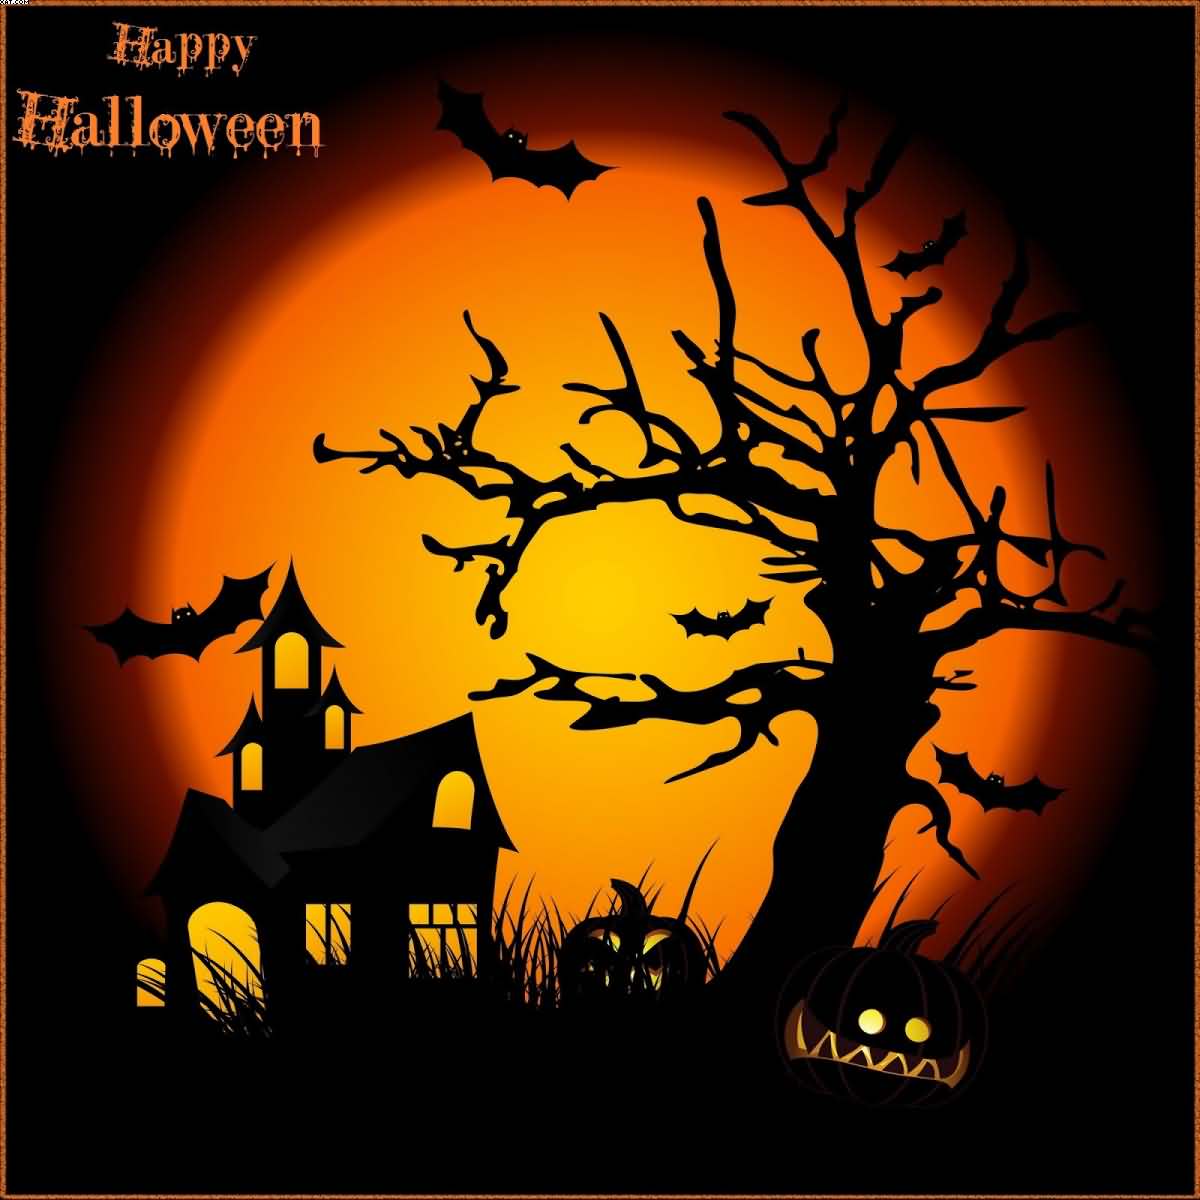 Happy Halloween card with scary pumpkin, bats flying over ghost house picture